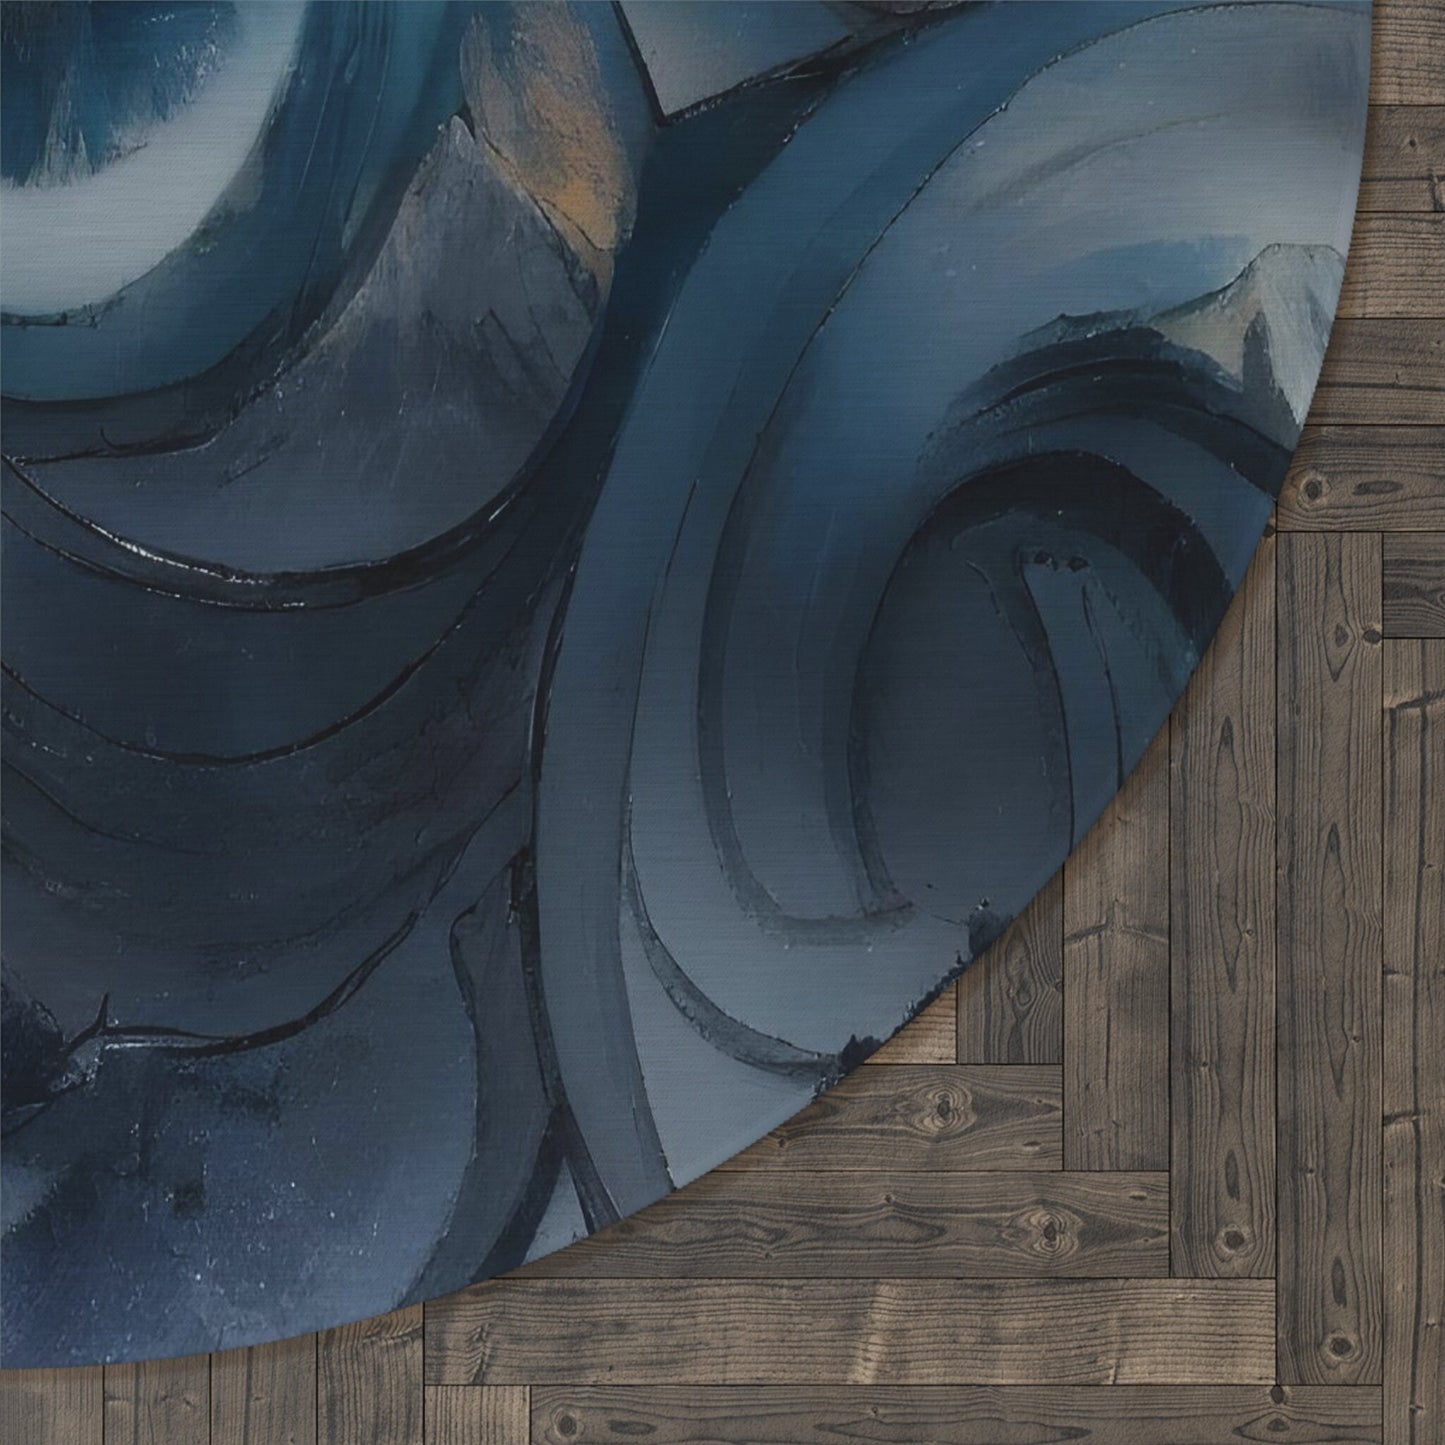 Abstract Art Rug Blue Rugs swirly unique Rugs 2x3 3x5 4x6 5x7 8x10 Large blue grey floormat